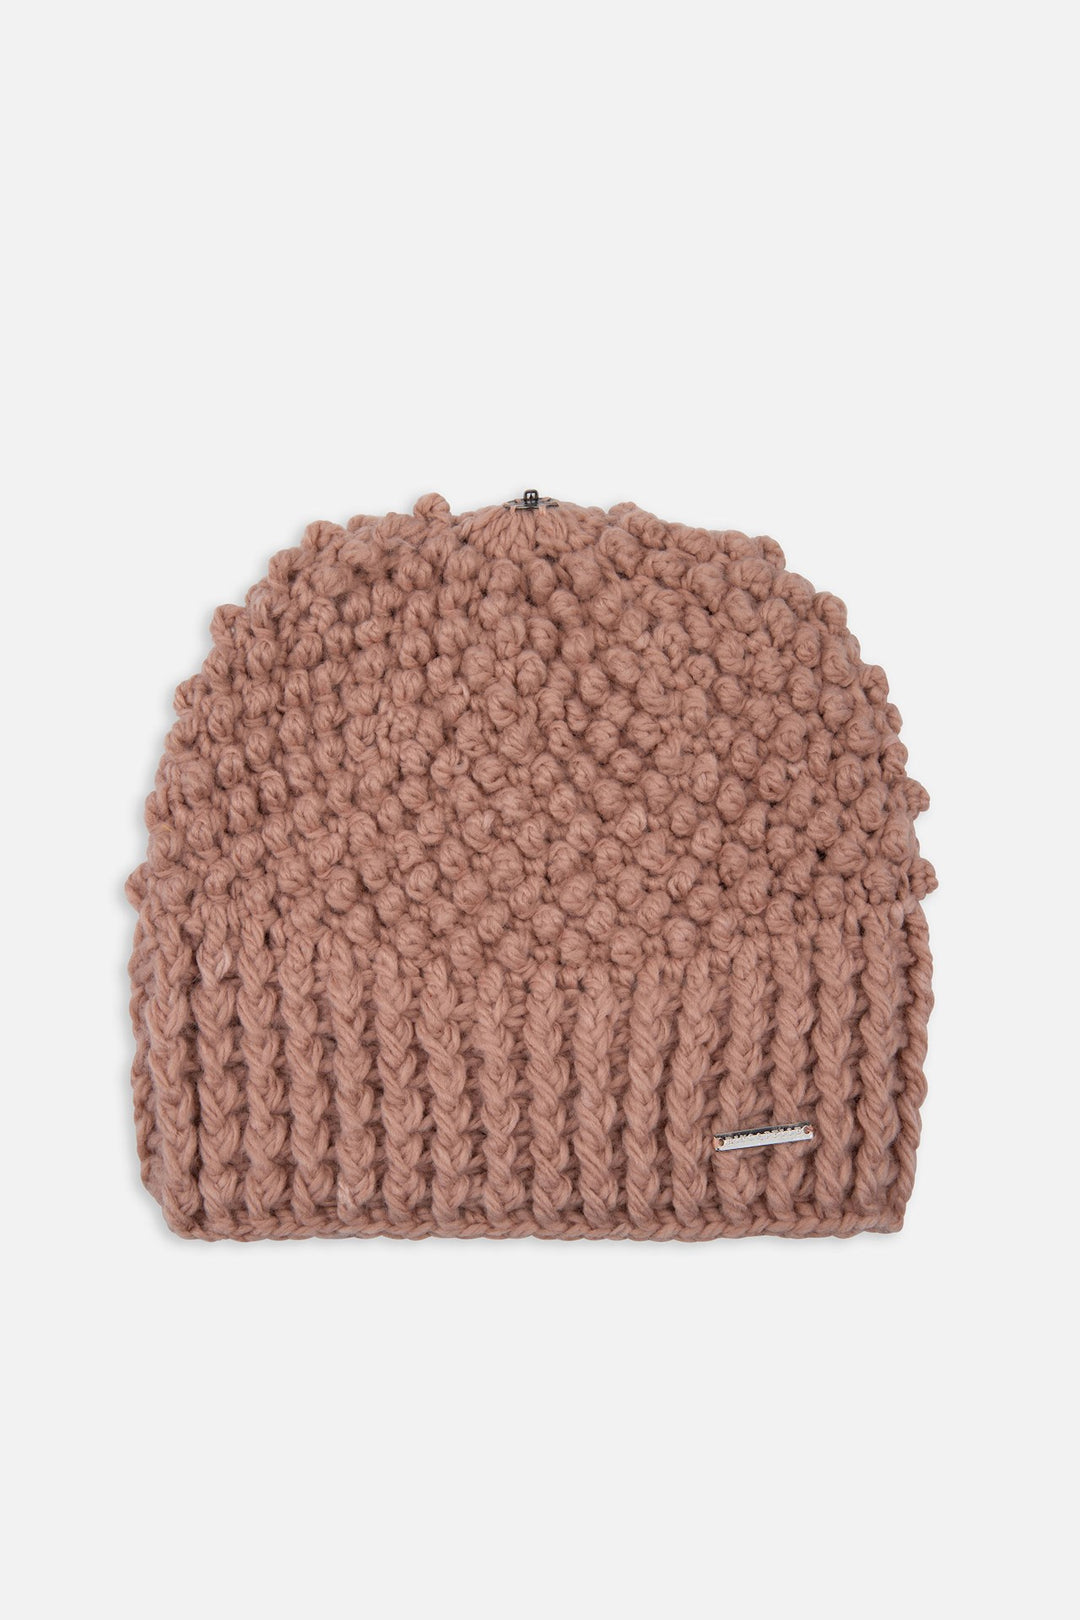 Rino & Pelle Kevina Knitted Beanie with Pom Pom Mable Sugar | Dotique